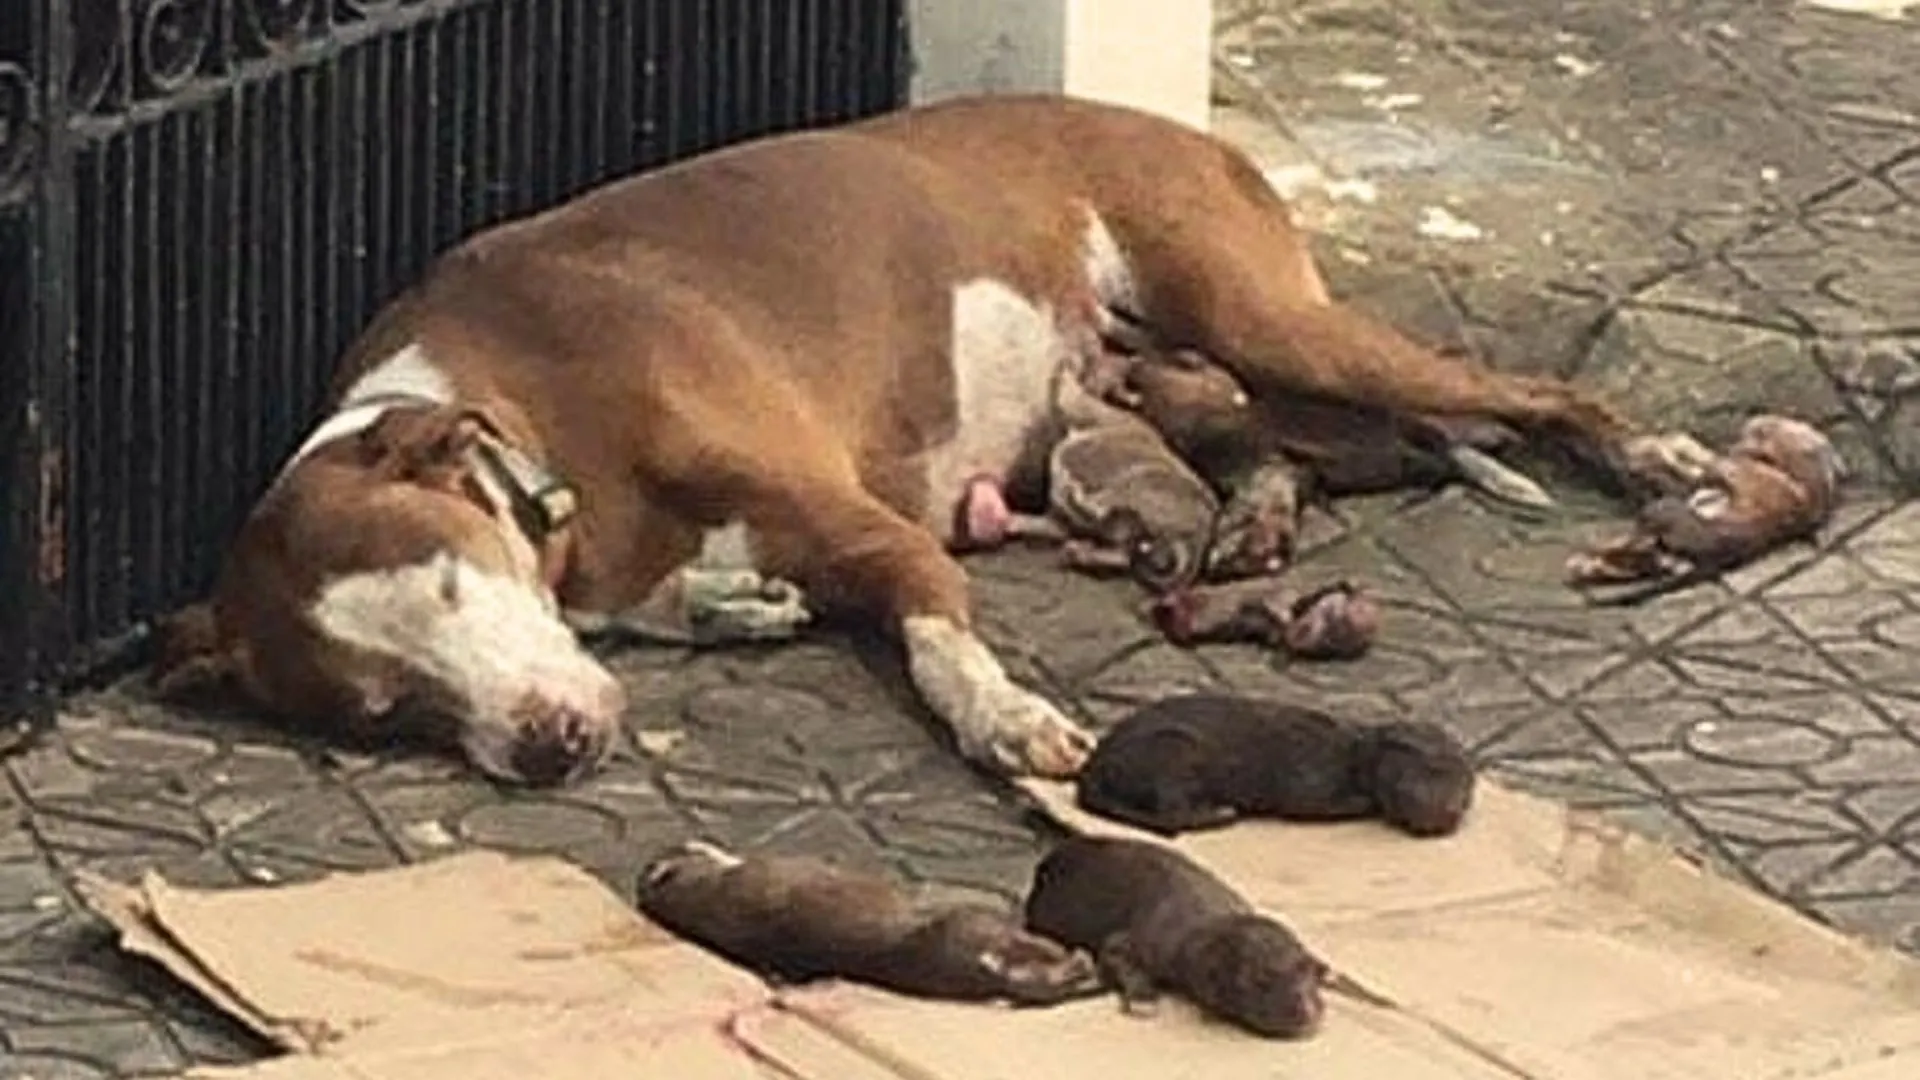 Brave Mama Dog Was Saved Hours After Giving Birth To Her Puppies